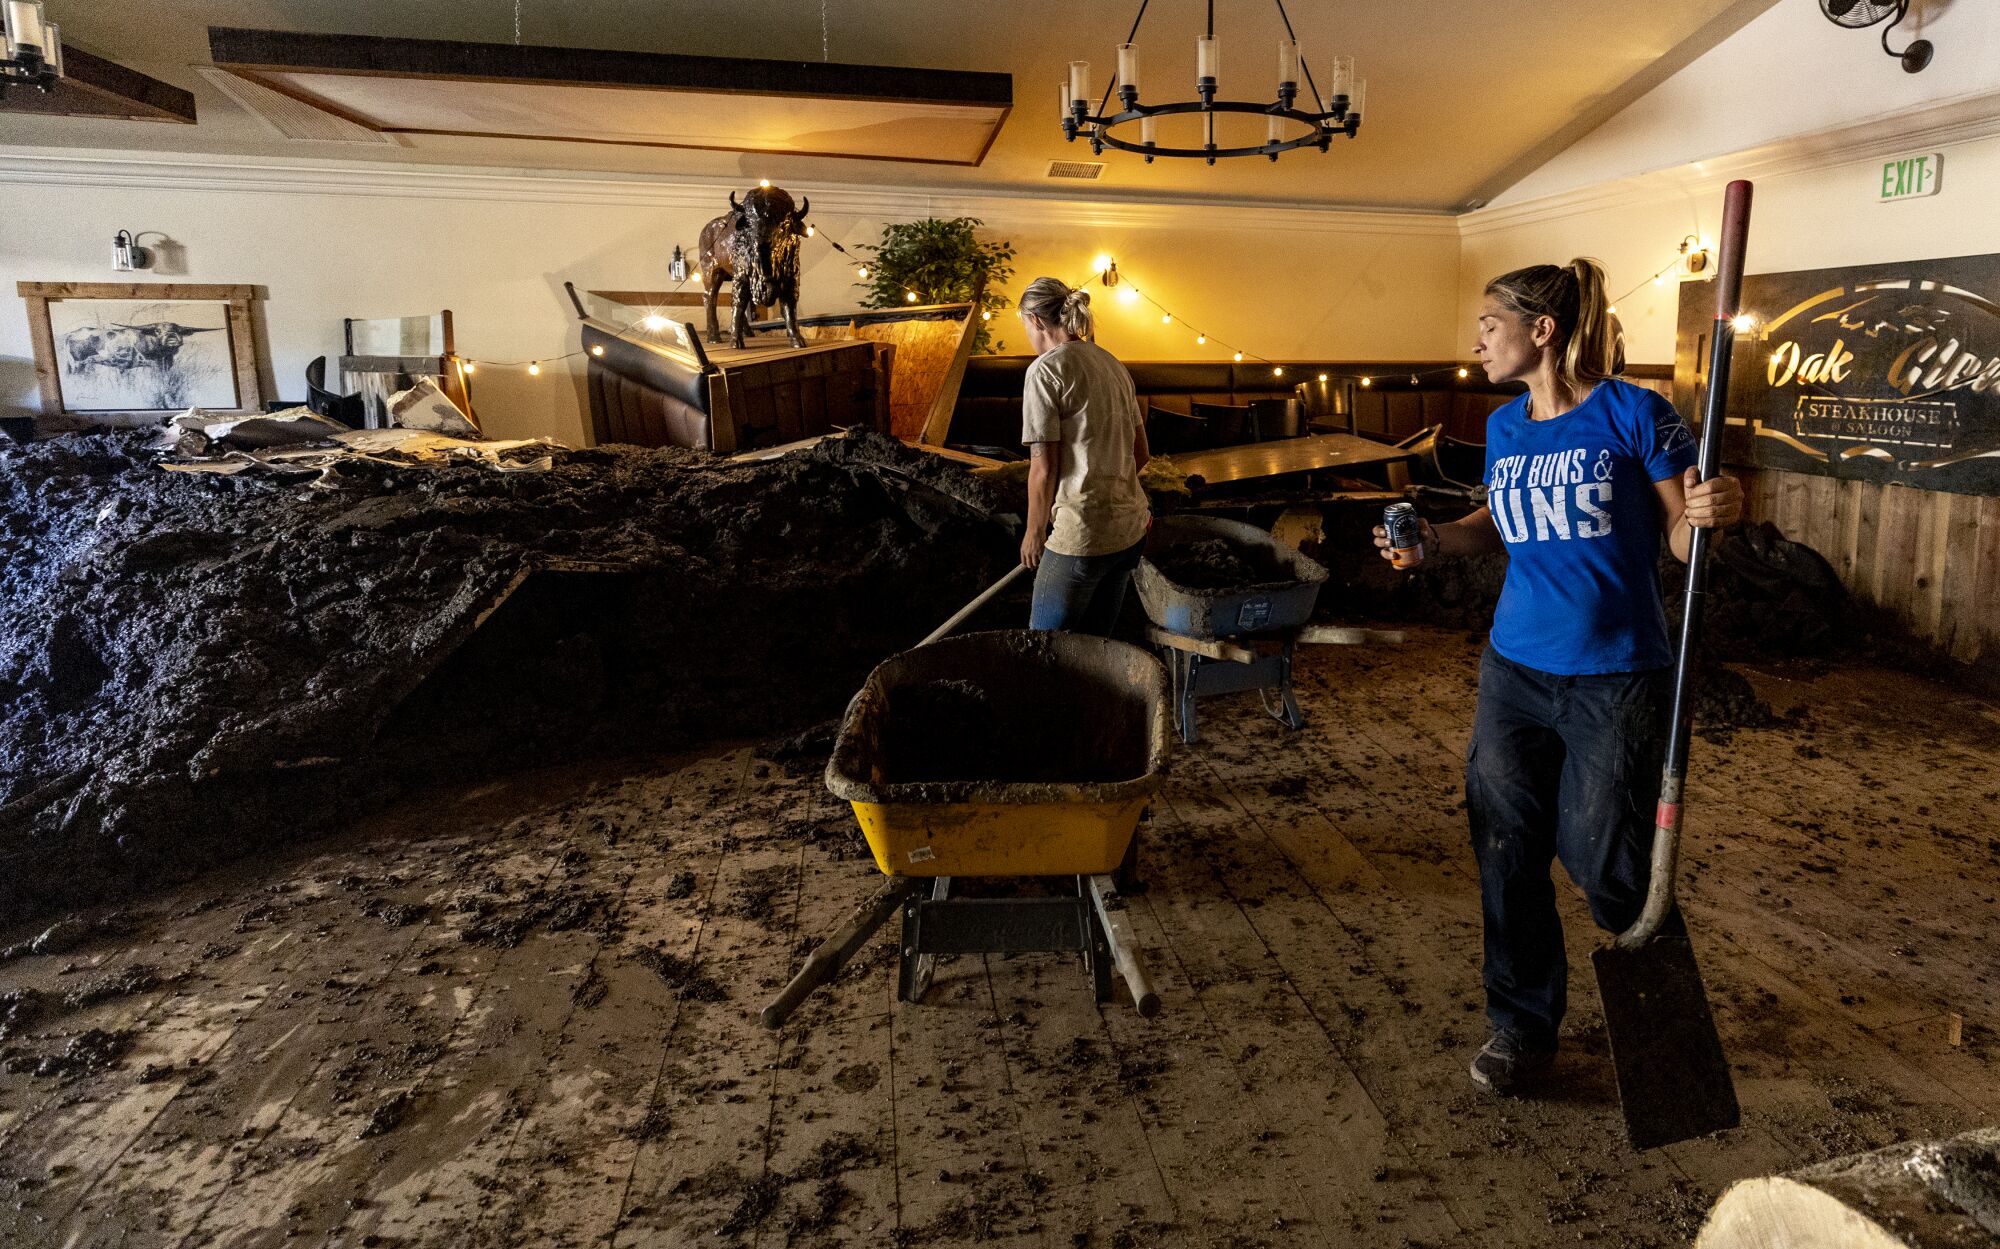 Two people in a room with mud four feet high